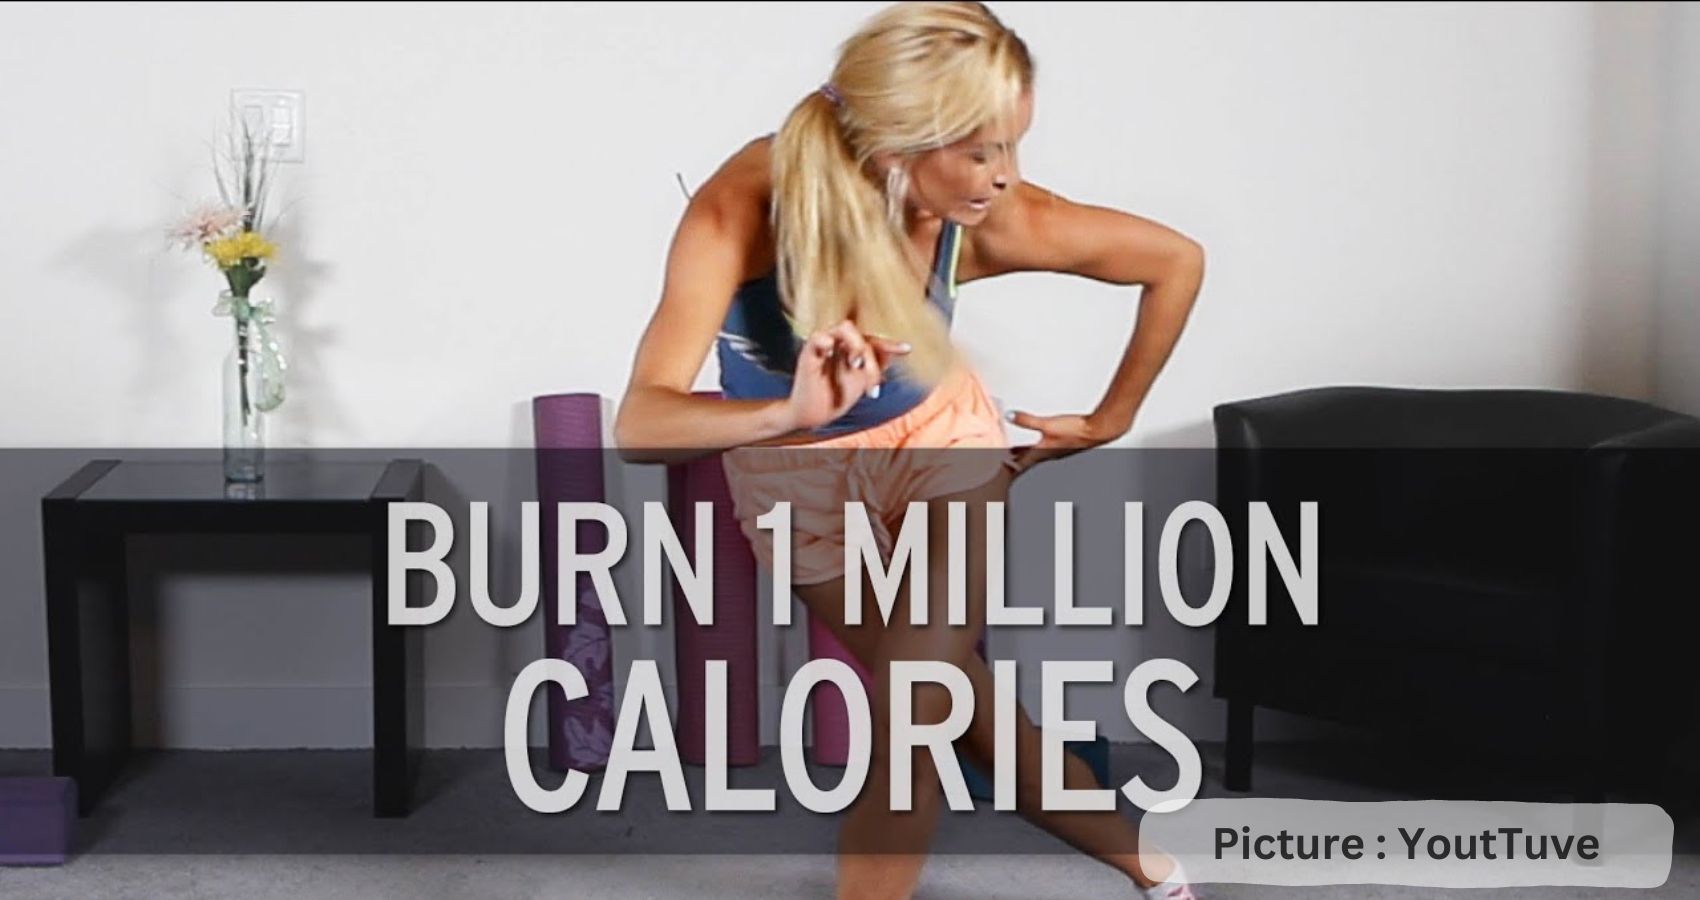 Which Exercise Burns the Most Calories?